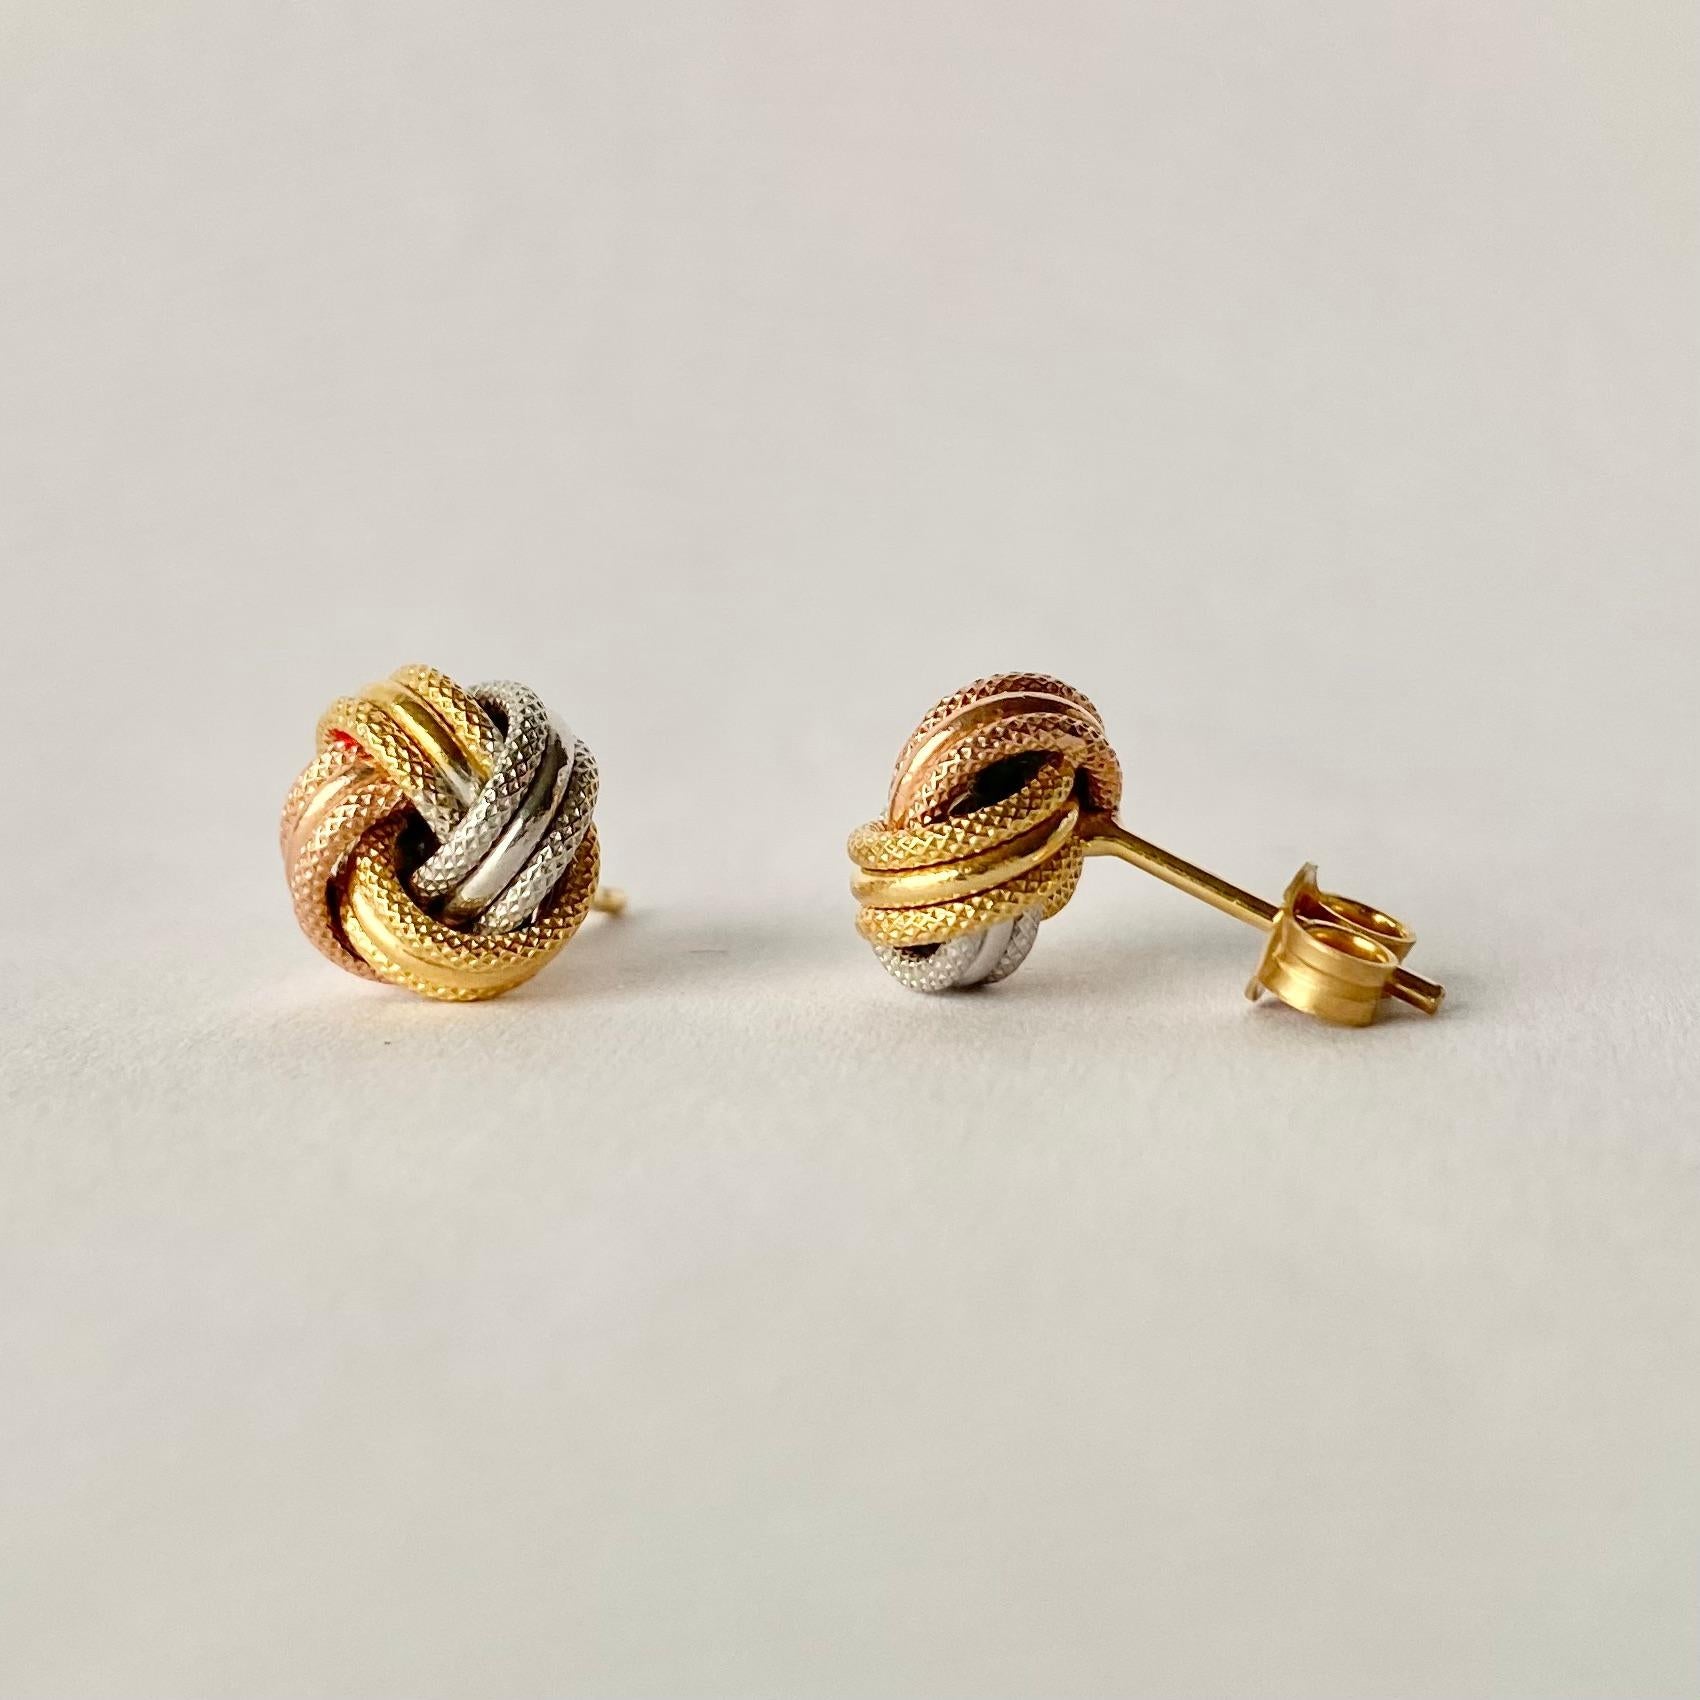 Glossy 9ct yellow, rose and white gold superbly tied in a knot make the most stylish design for these earrings. 

Knot Diameter: 9mm
Height From Ear: 6mm

Weight: 0.77g